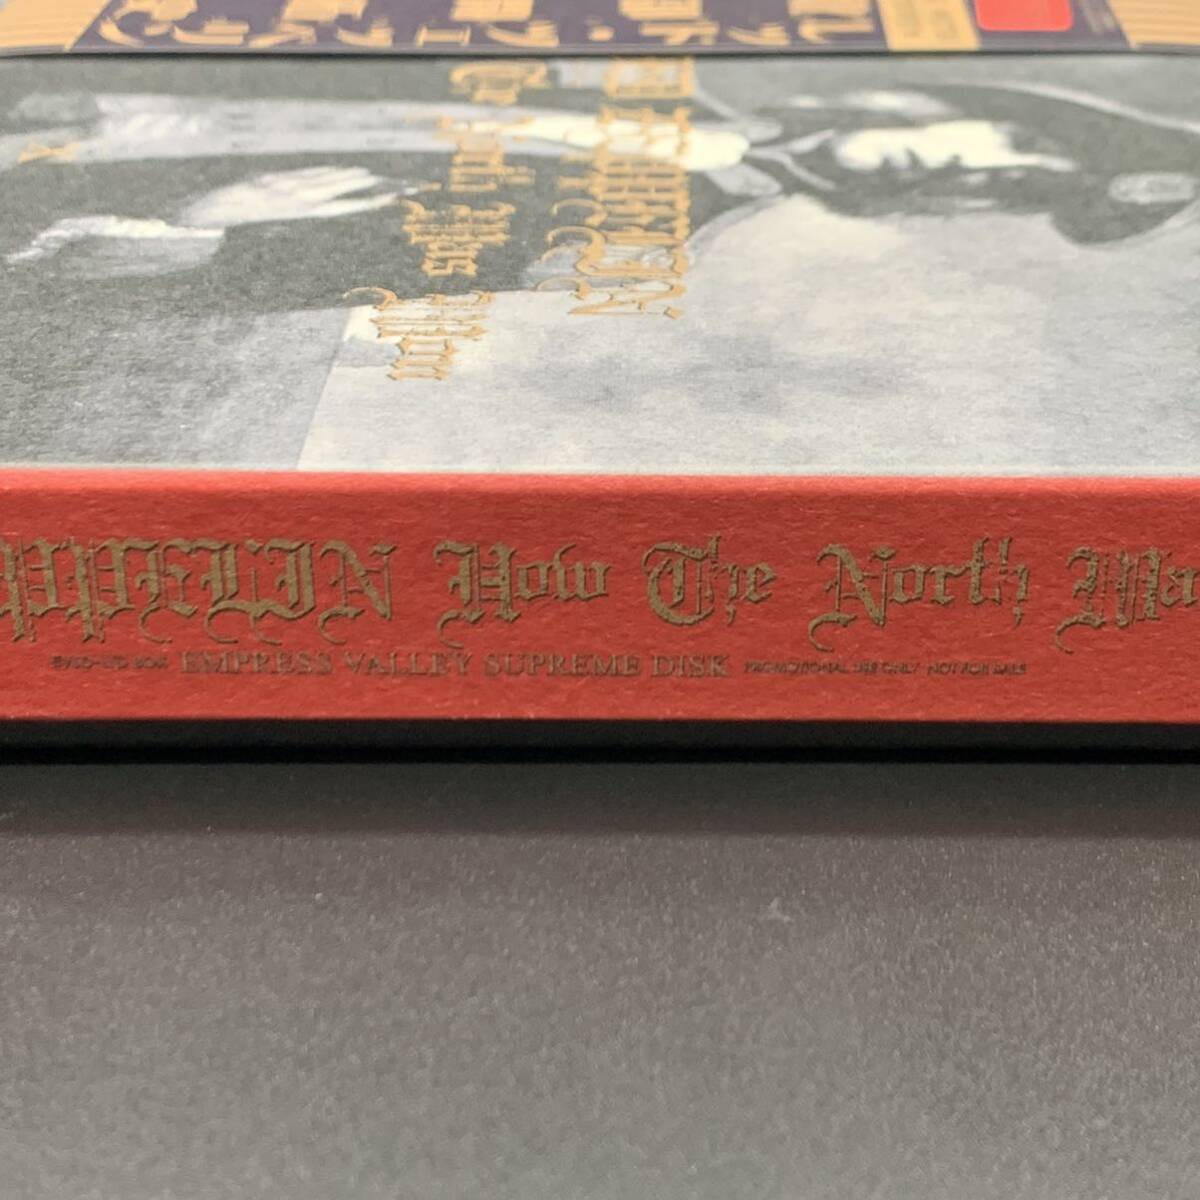 LED ZEPPELIN / HOW THE NORTH WAS WON「北部開拓史」(8CD BOX)_画像6